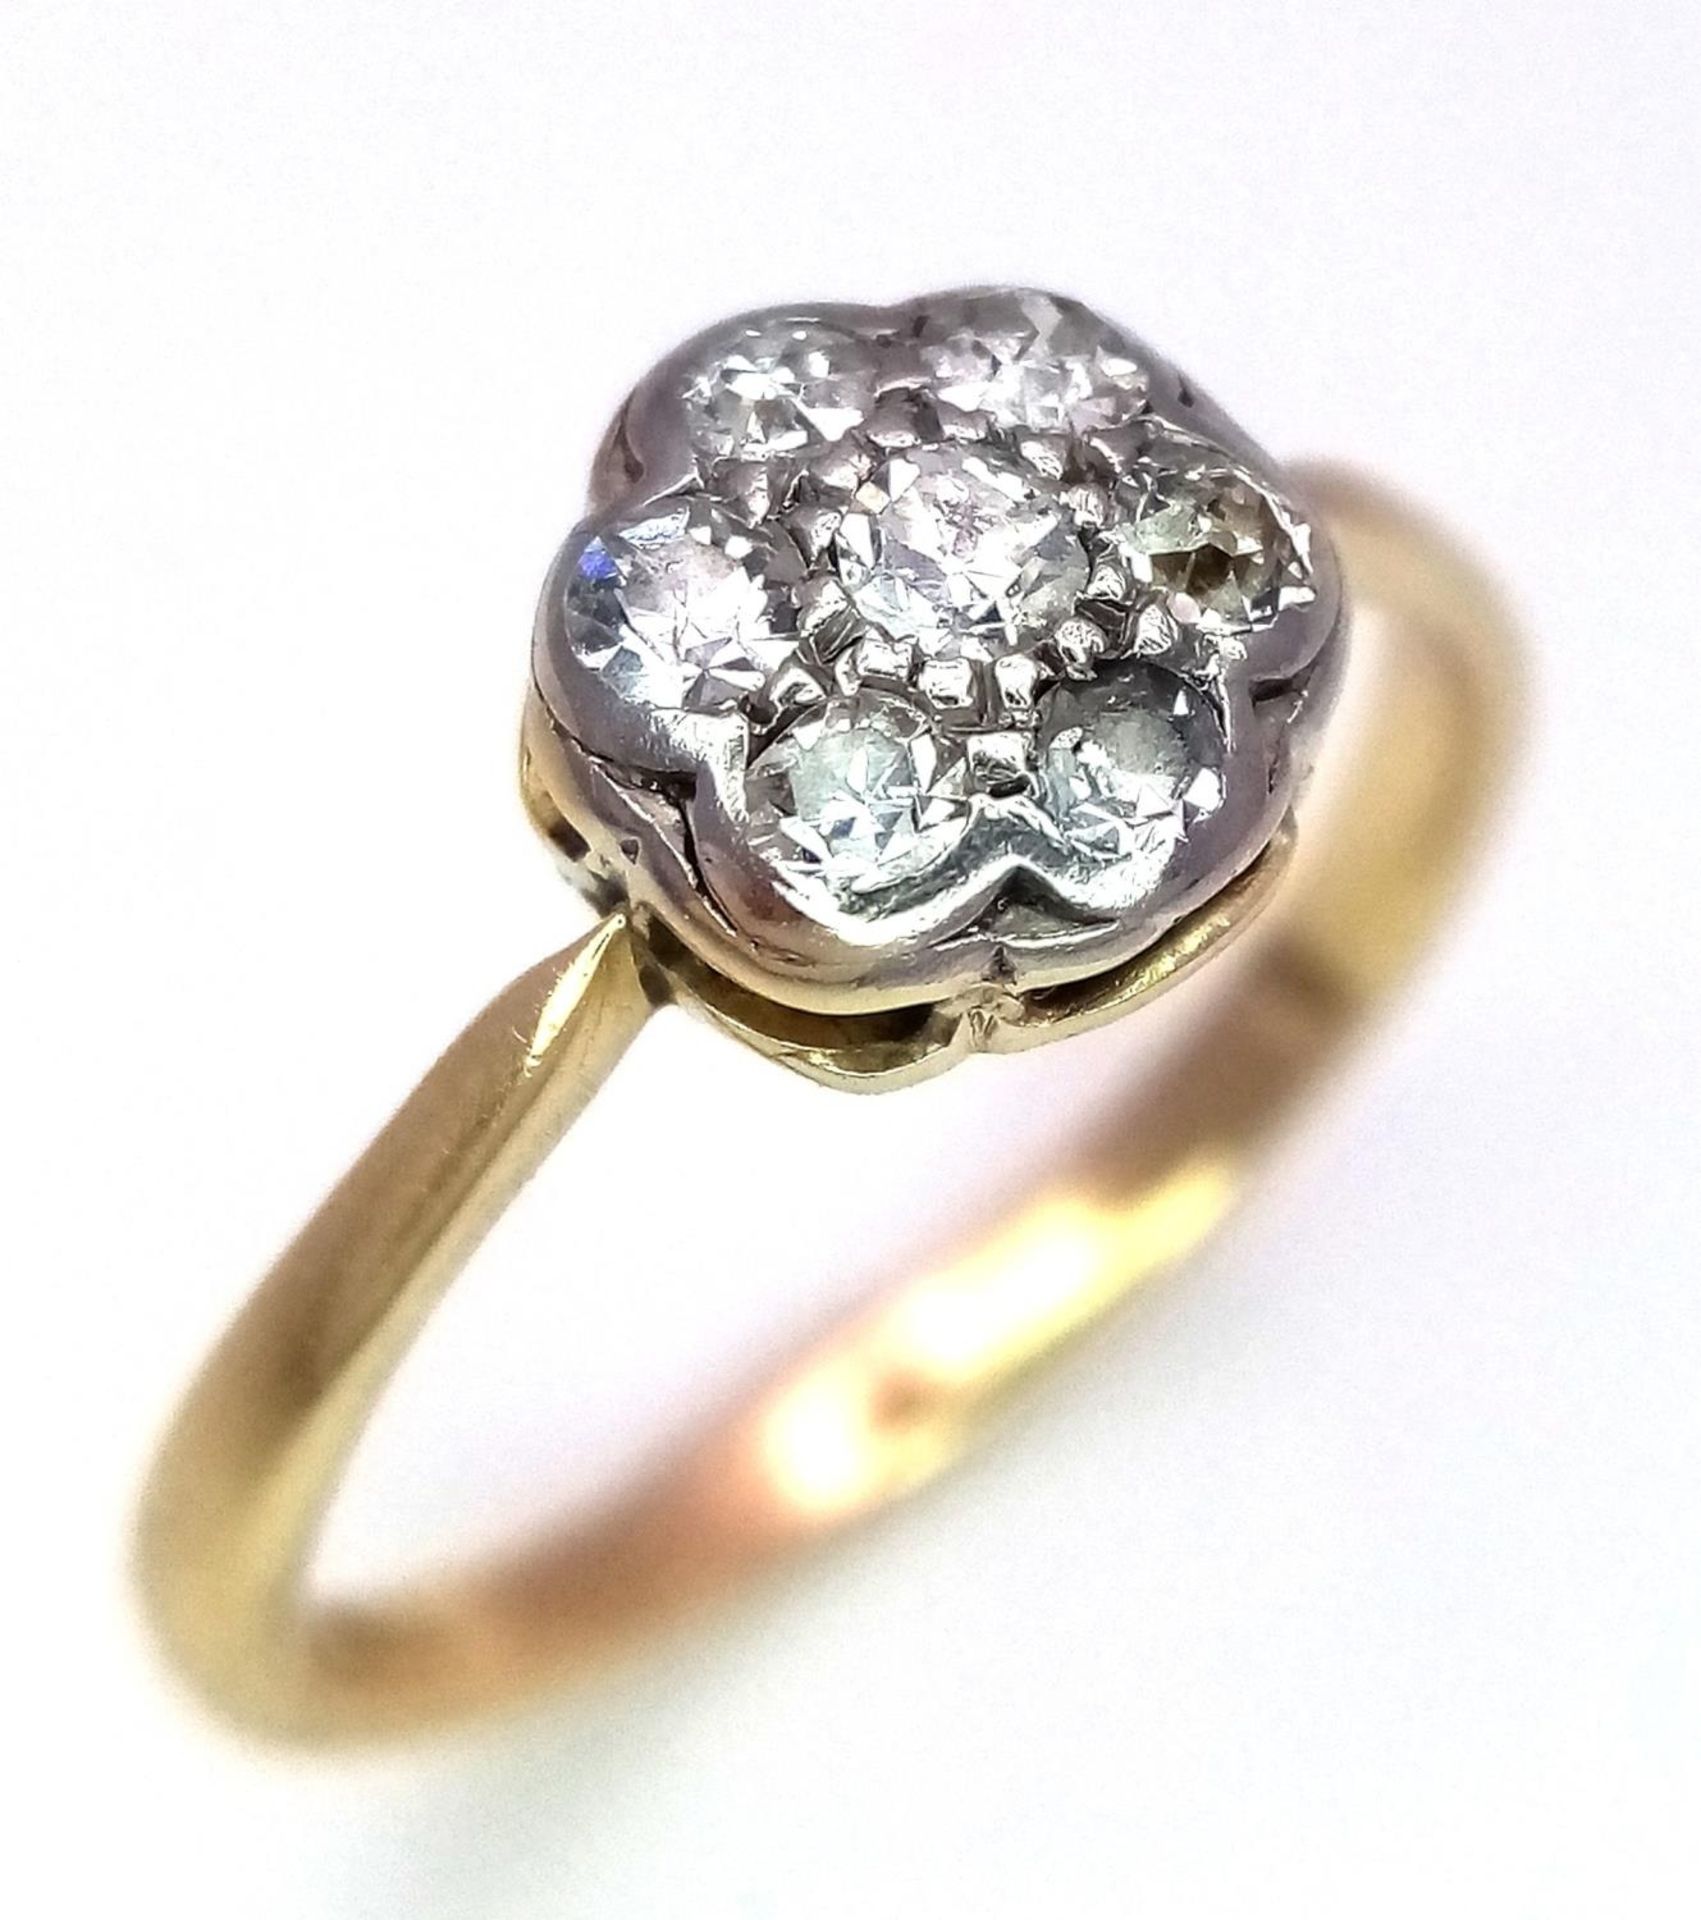 AN 18K YELLOW GOLD & PLATINUM VINTAGE OLD CUT DIAMOND CLUSTER RING. 0.25ctw, size M, 2g total